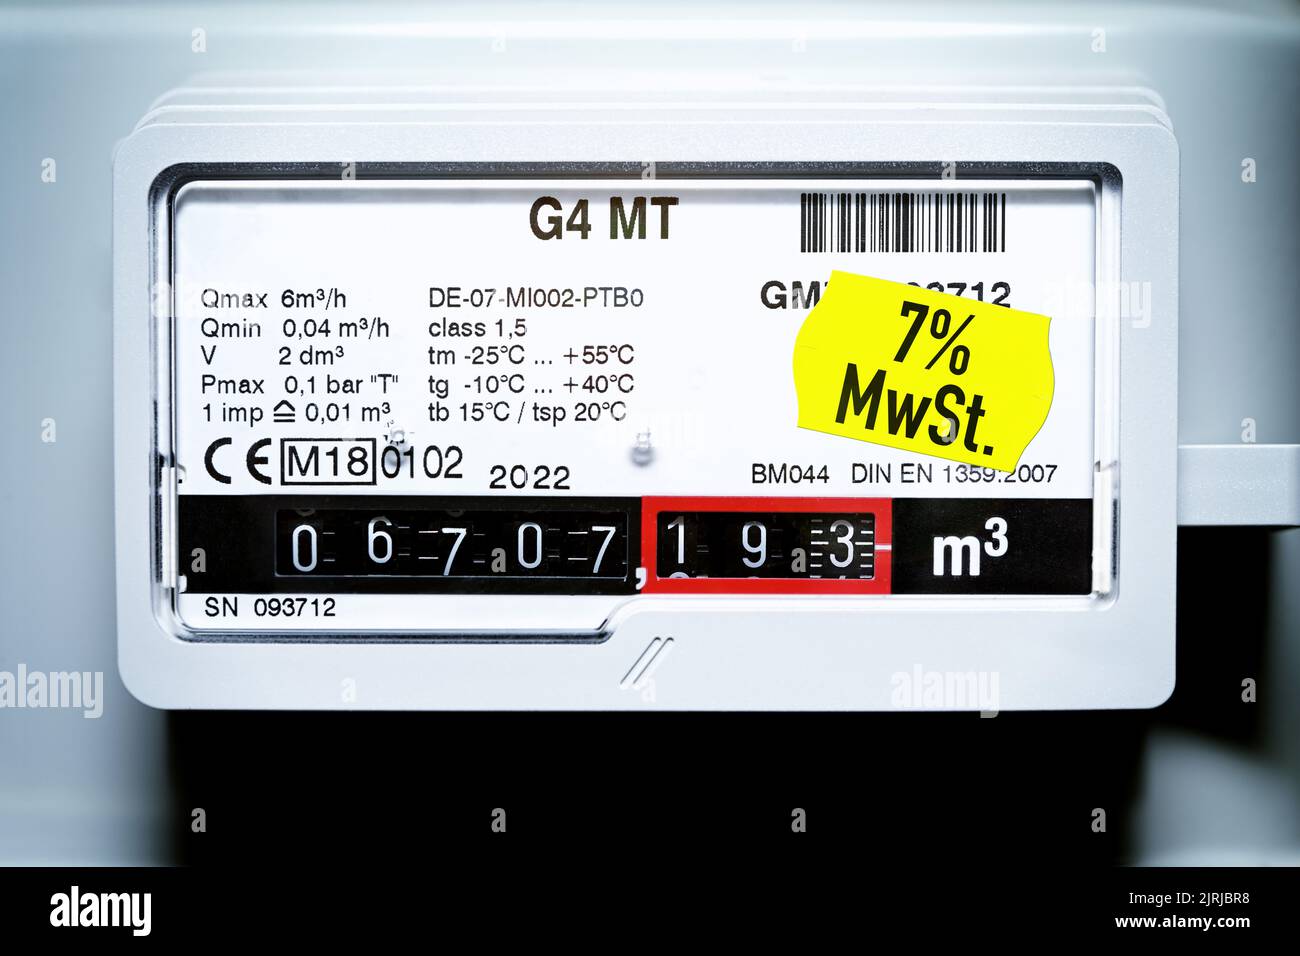 Gas Meter With Price Label And Inscription VAT 7%, Symbol Photo Gas Levy Stock Photo